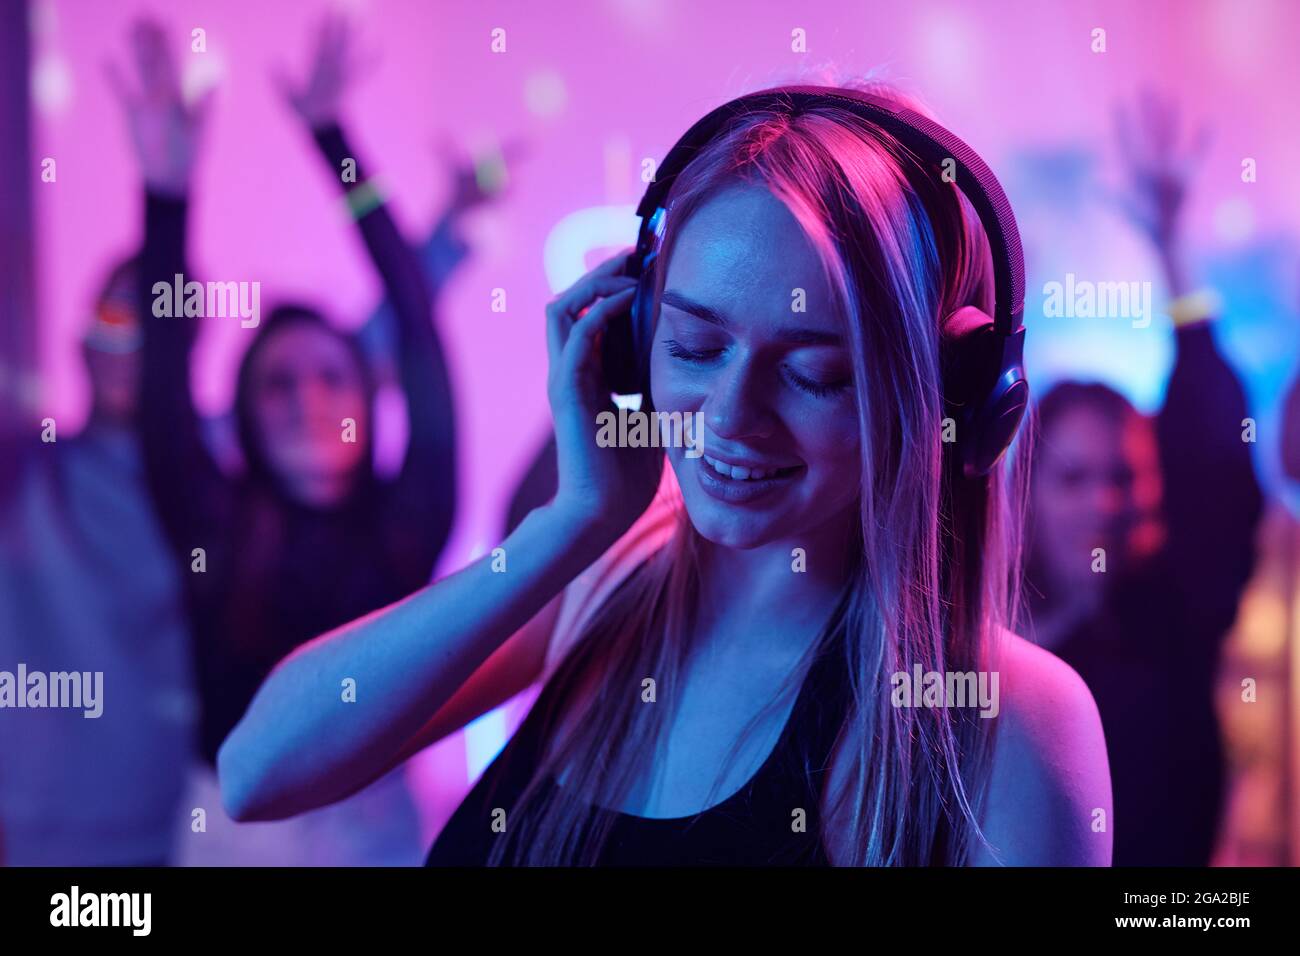 Pretty girl with long blond hair touching headphones while mixing sounds for disco dancing and enjoying party with excited friends on background Stock Photo